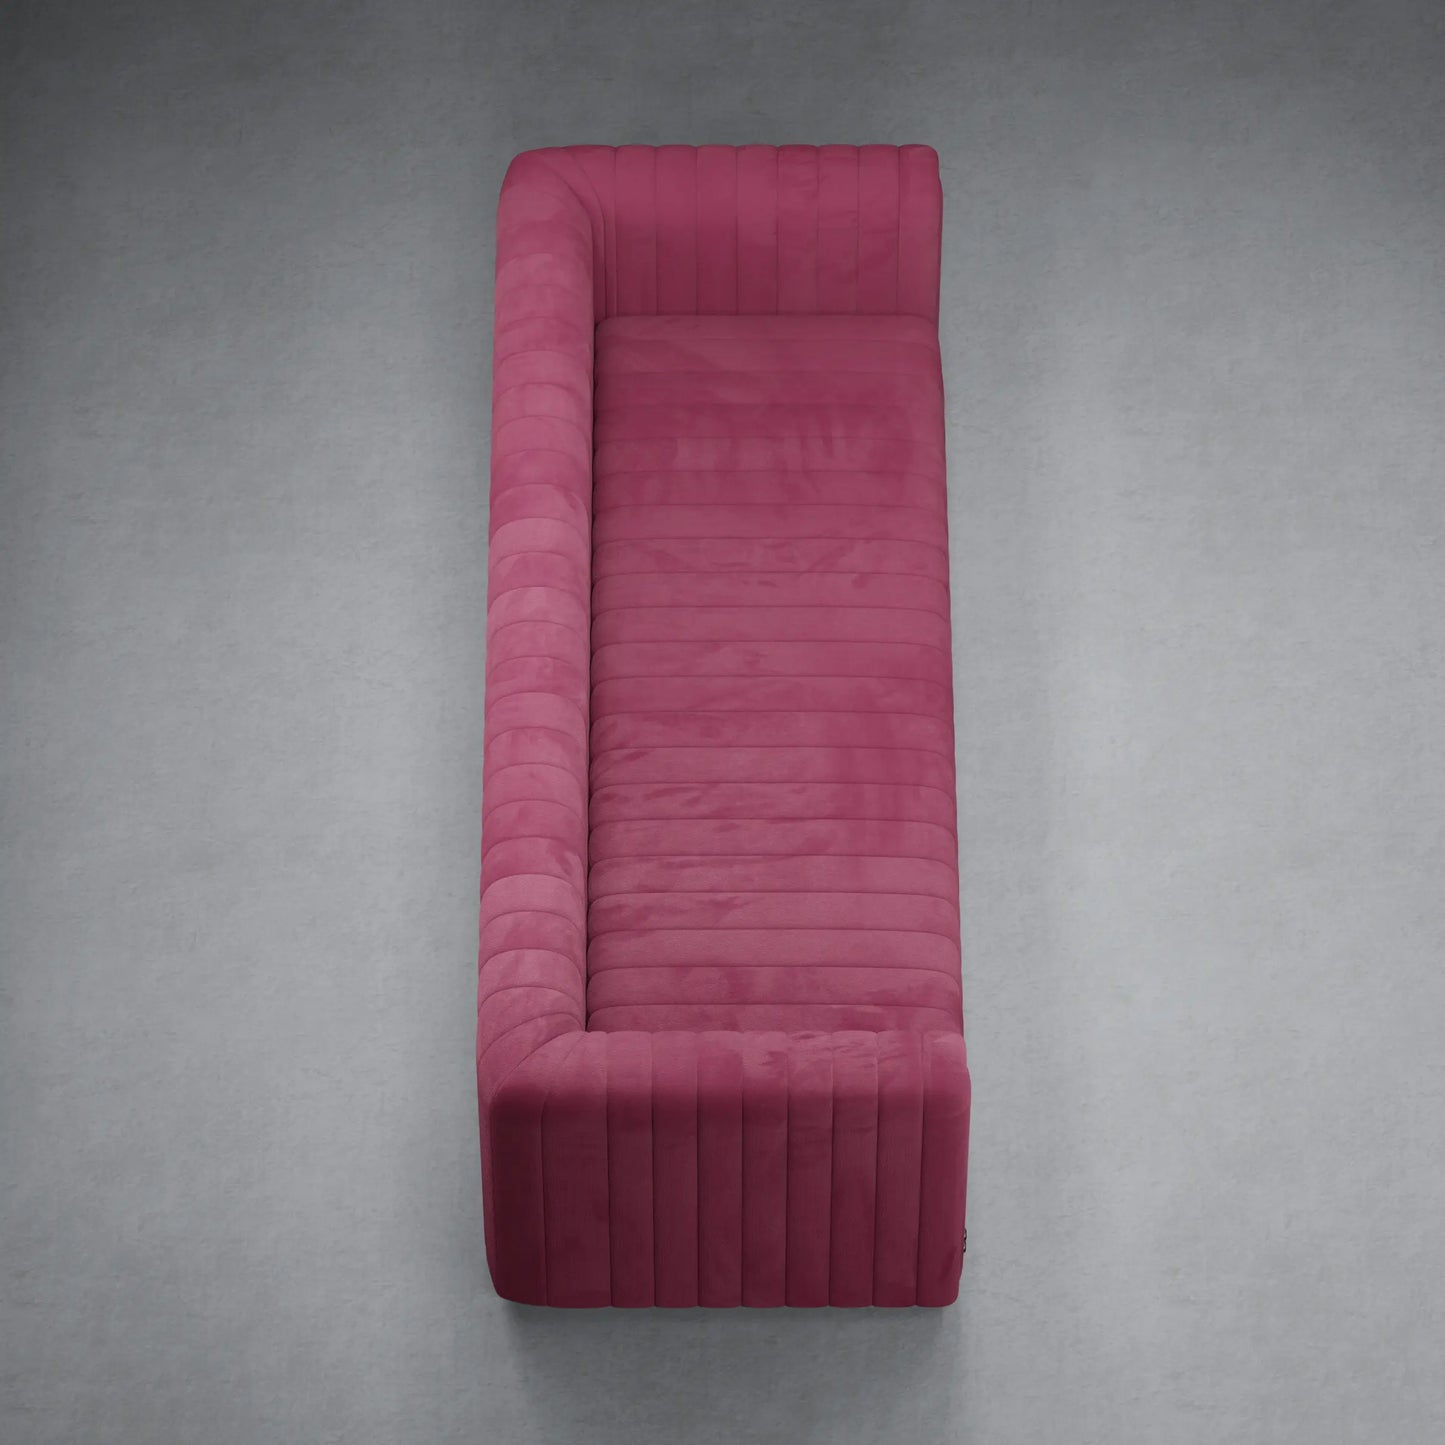 FIG  - XL 3 Seater Couch in Velvet Finish | Dark Pink Color